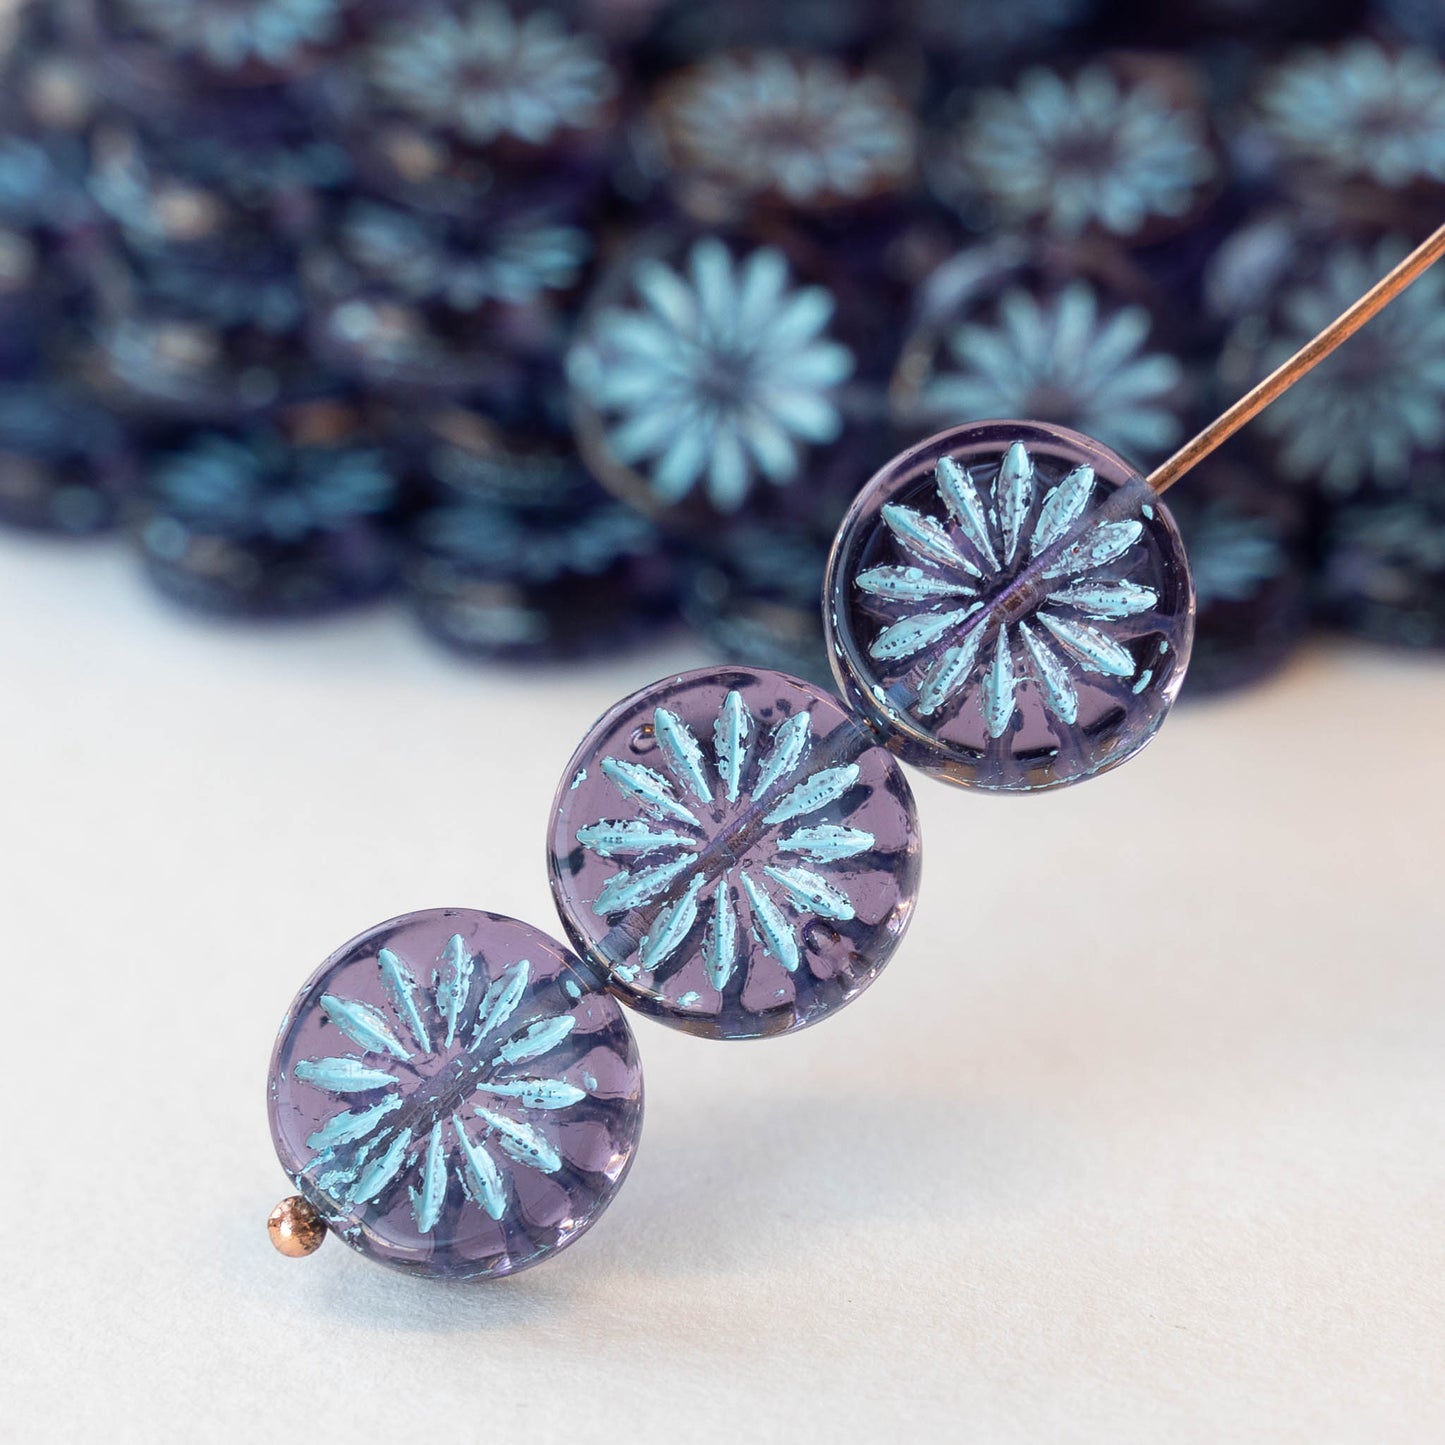 12mm Sun Coin Beads - Transparent Tanzanite with Light Blue Wash - 6 Beads